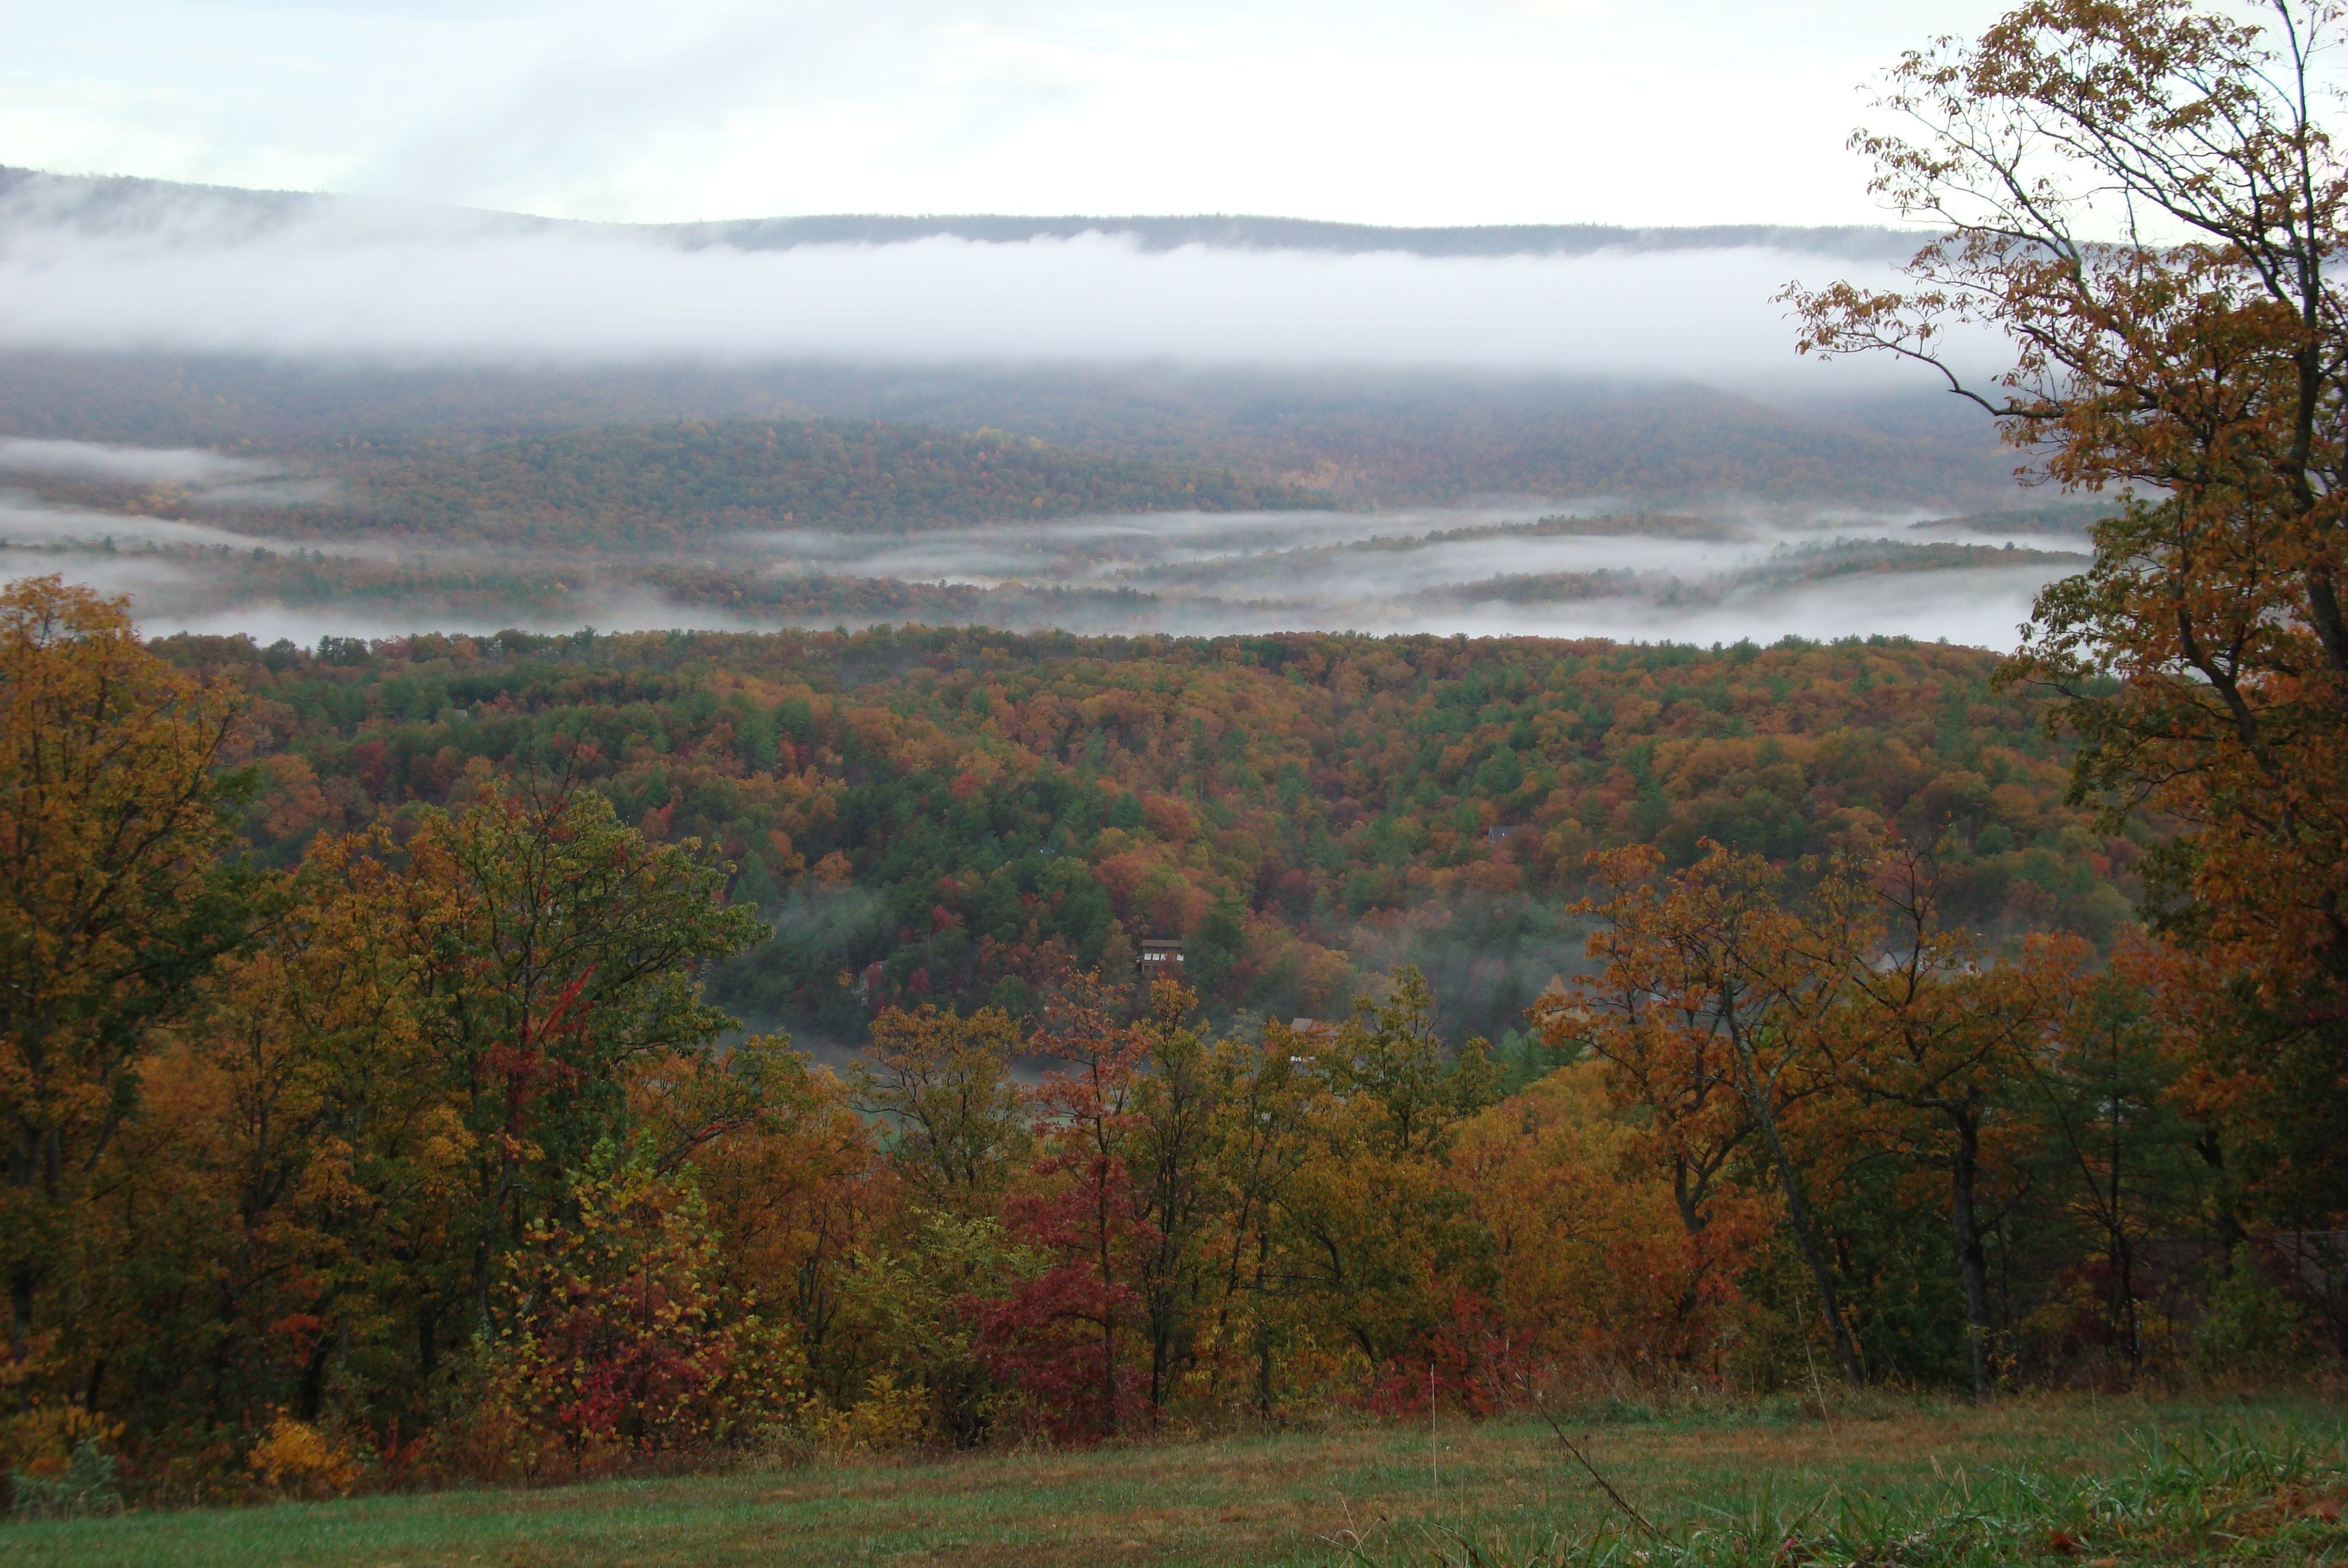 View to the West in Autumn with early morning fog.  12.65 acres for sale in Shenandoah Valley, Va, Basye, Bryce Resort.